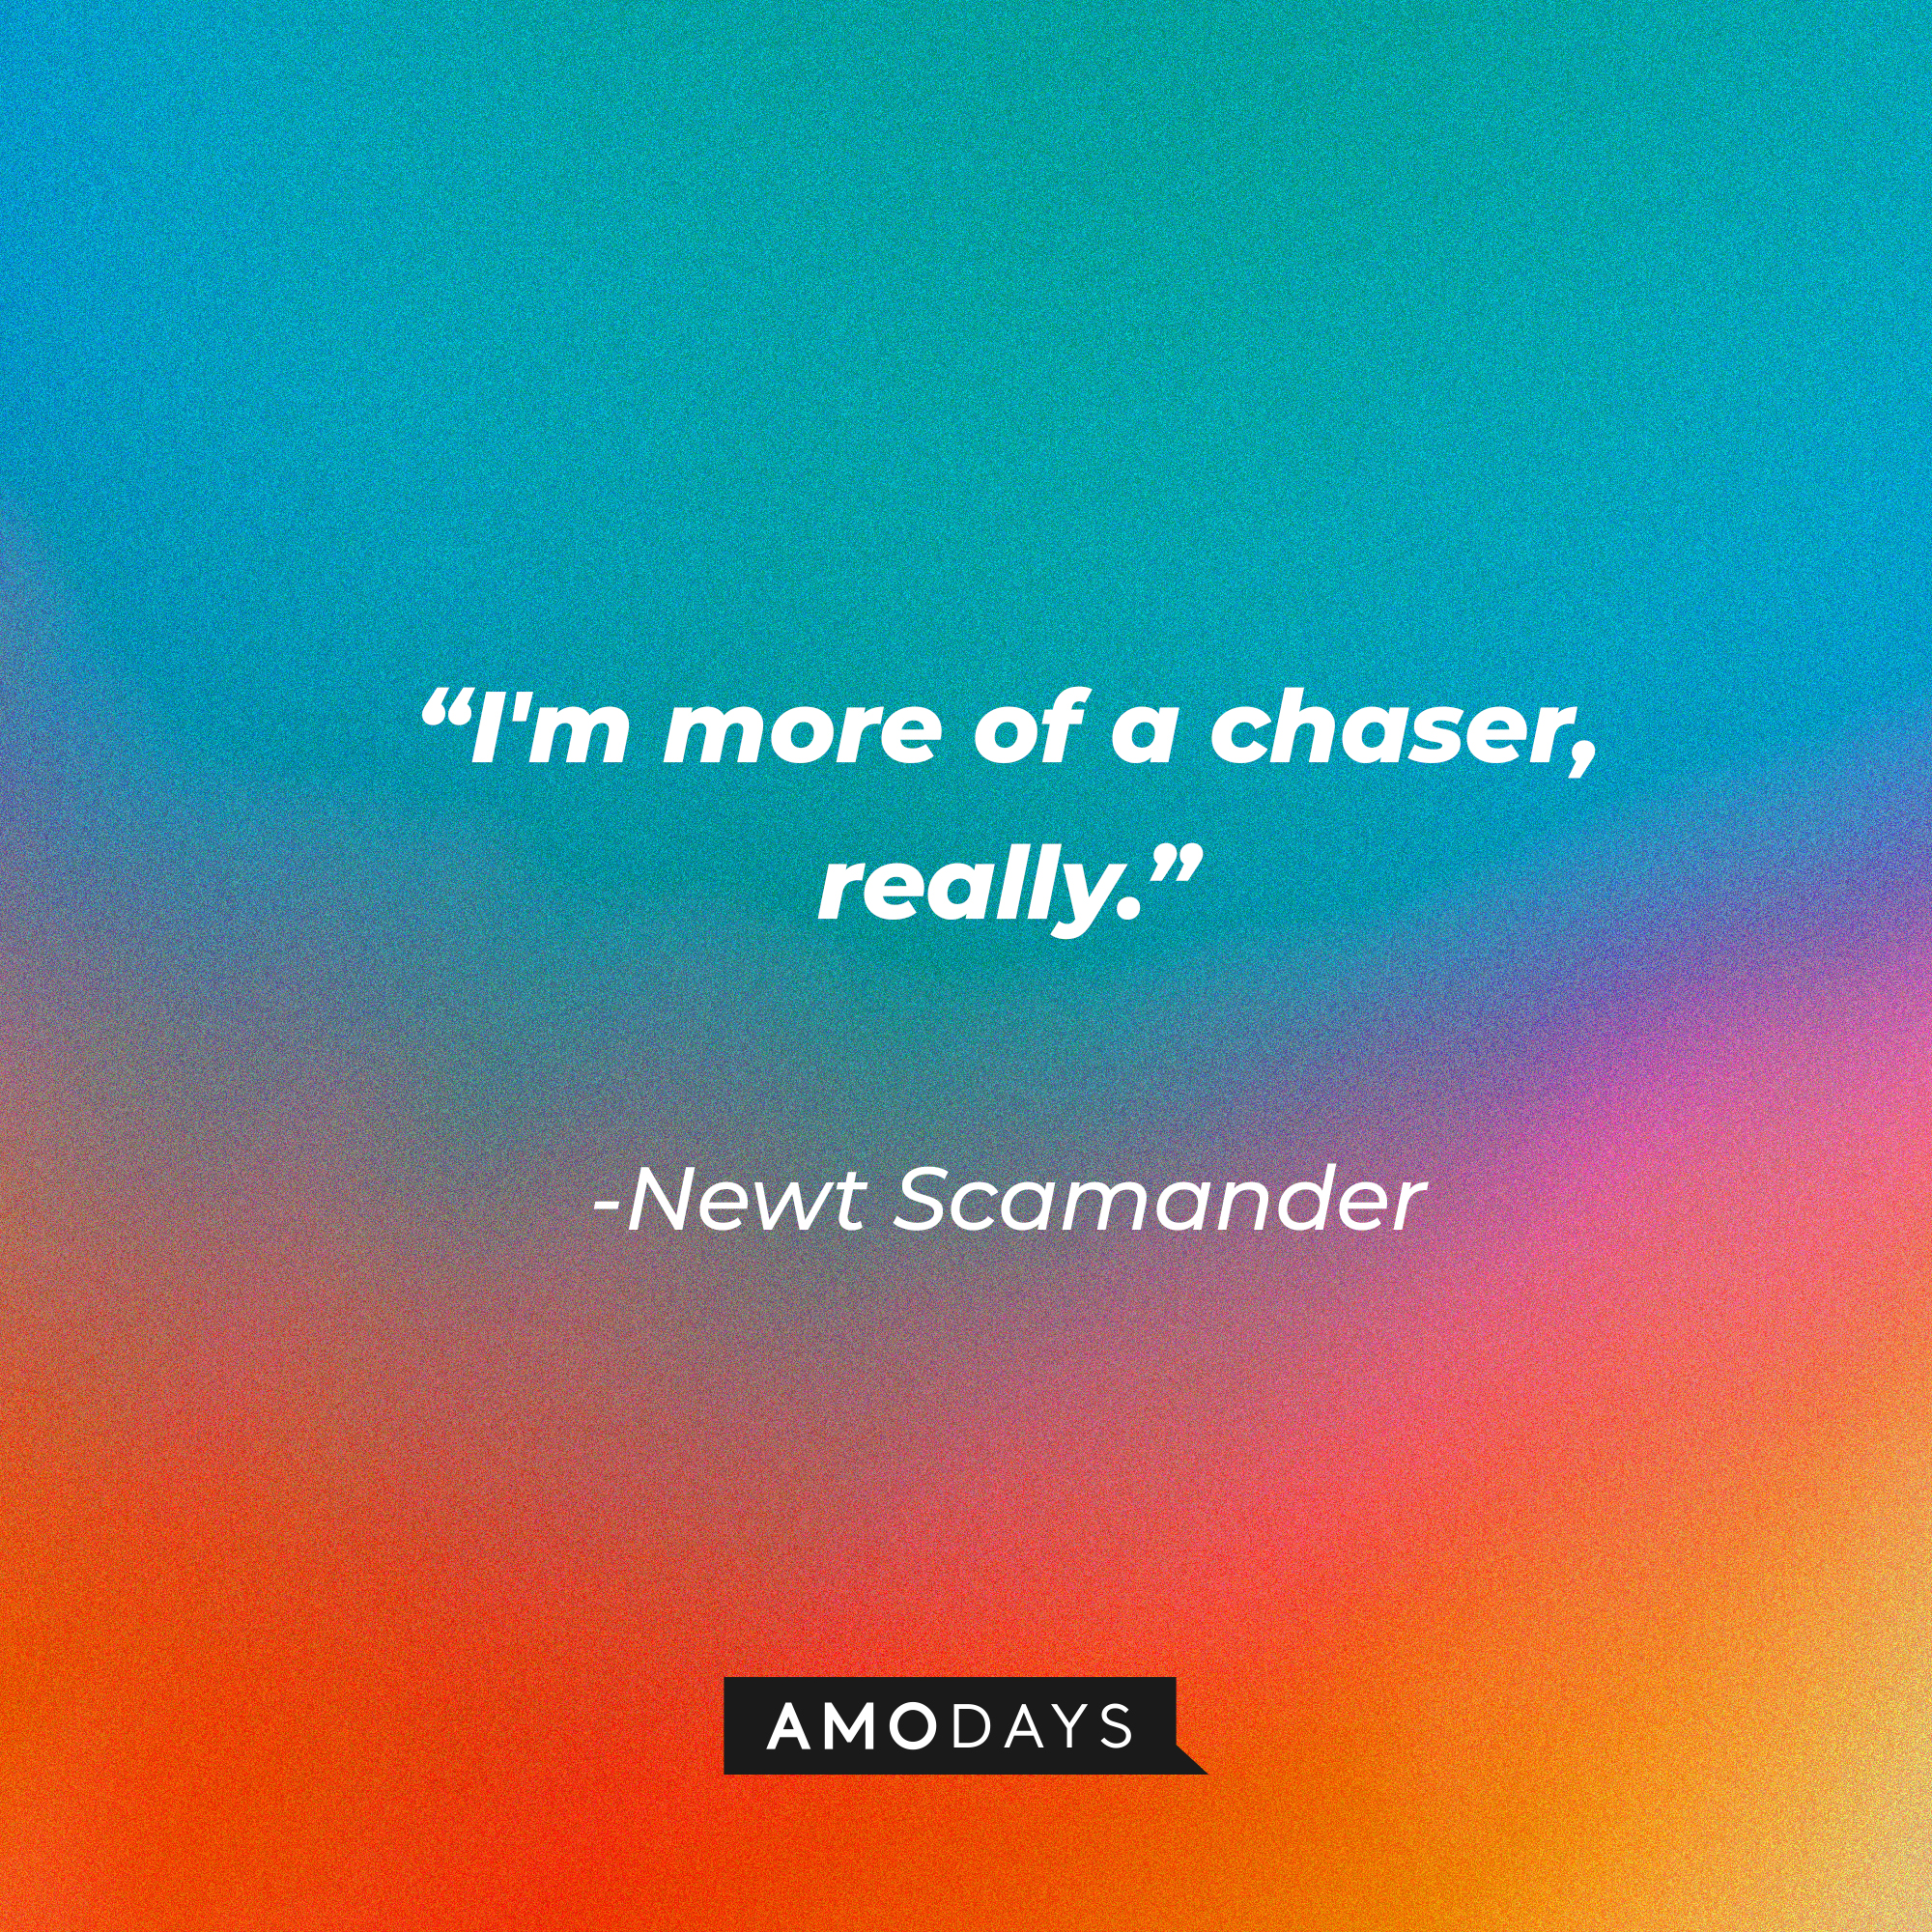 Newt Scamander's quote: "I'm more of a chaser, really." | Source: facebook.com/fantasticbeastsmovie